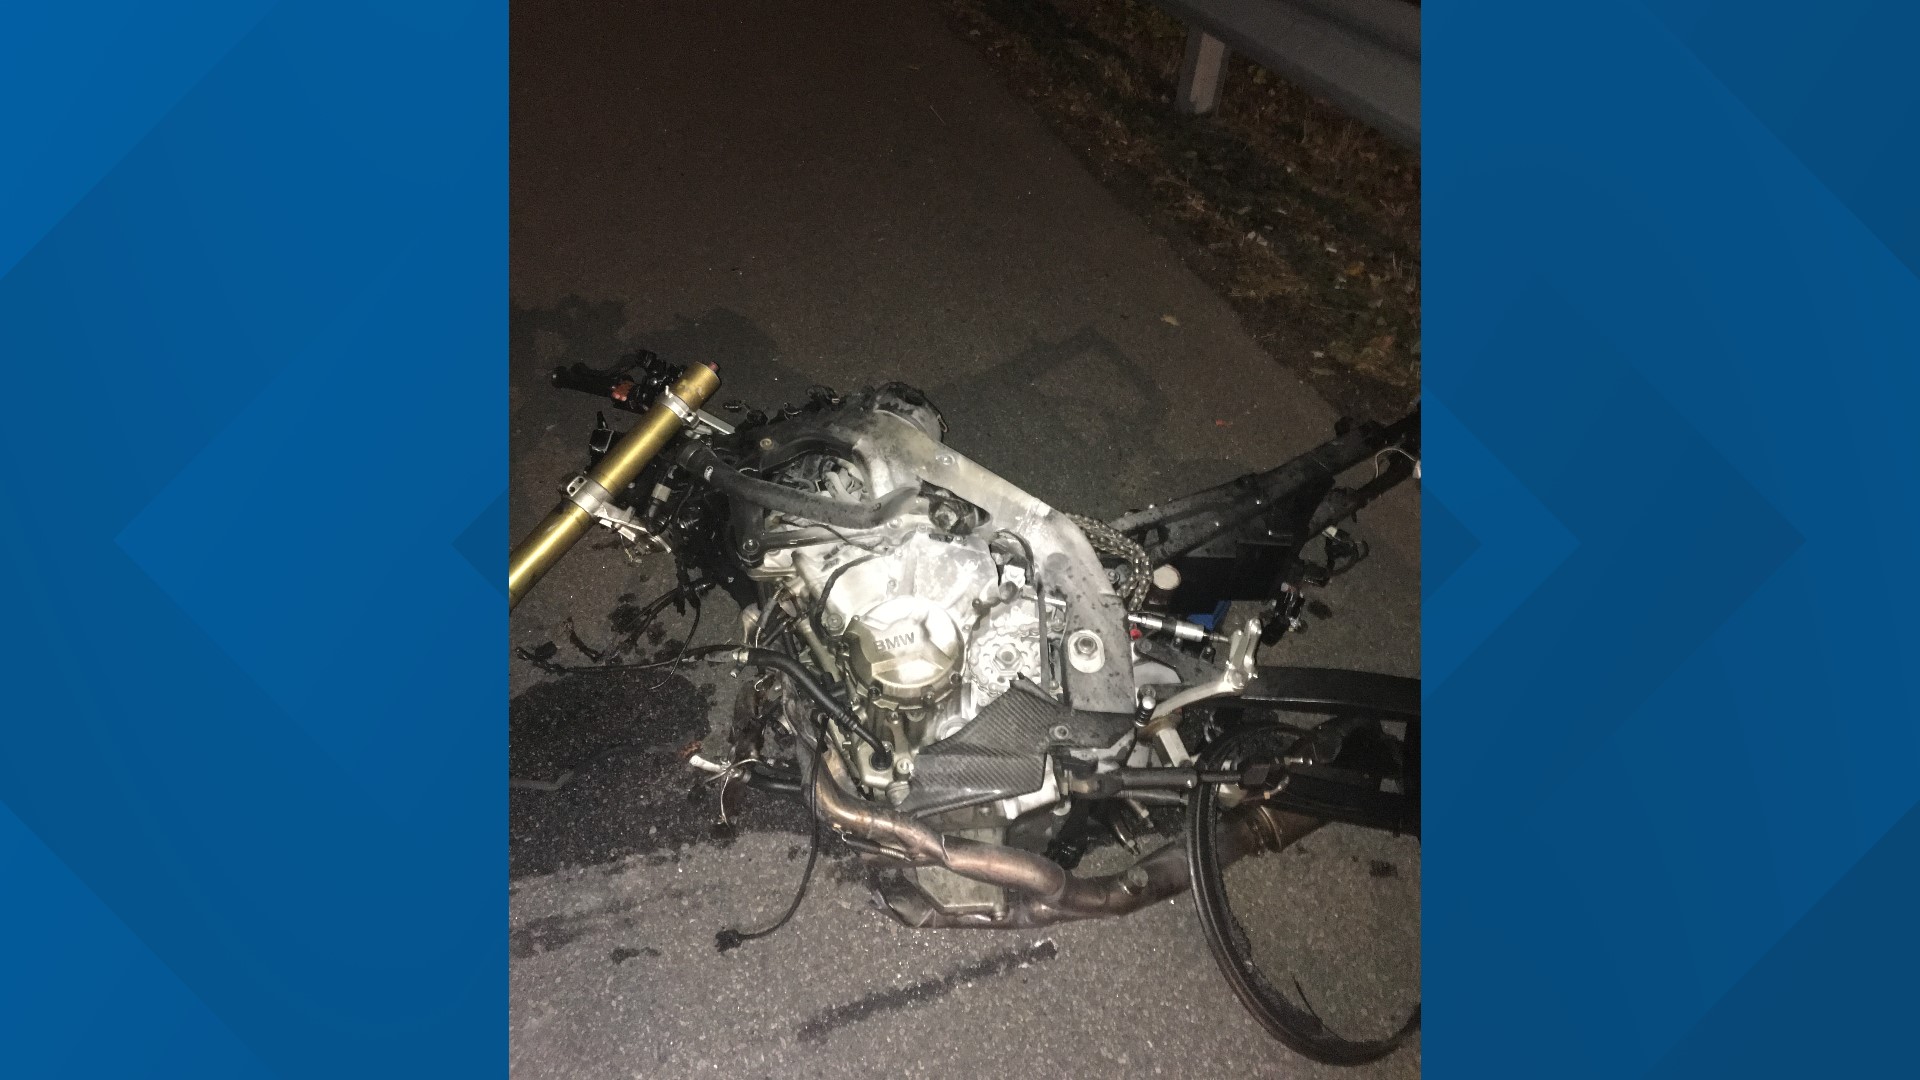 Two motorcycles and a car were involved.